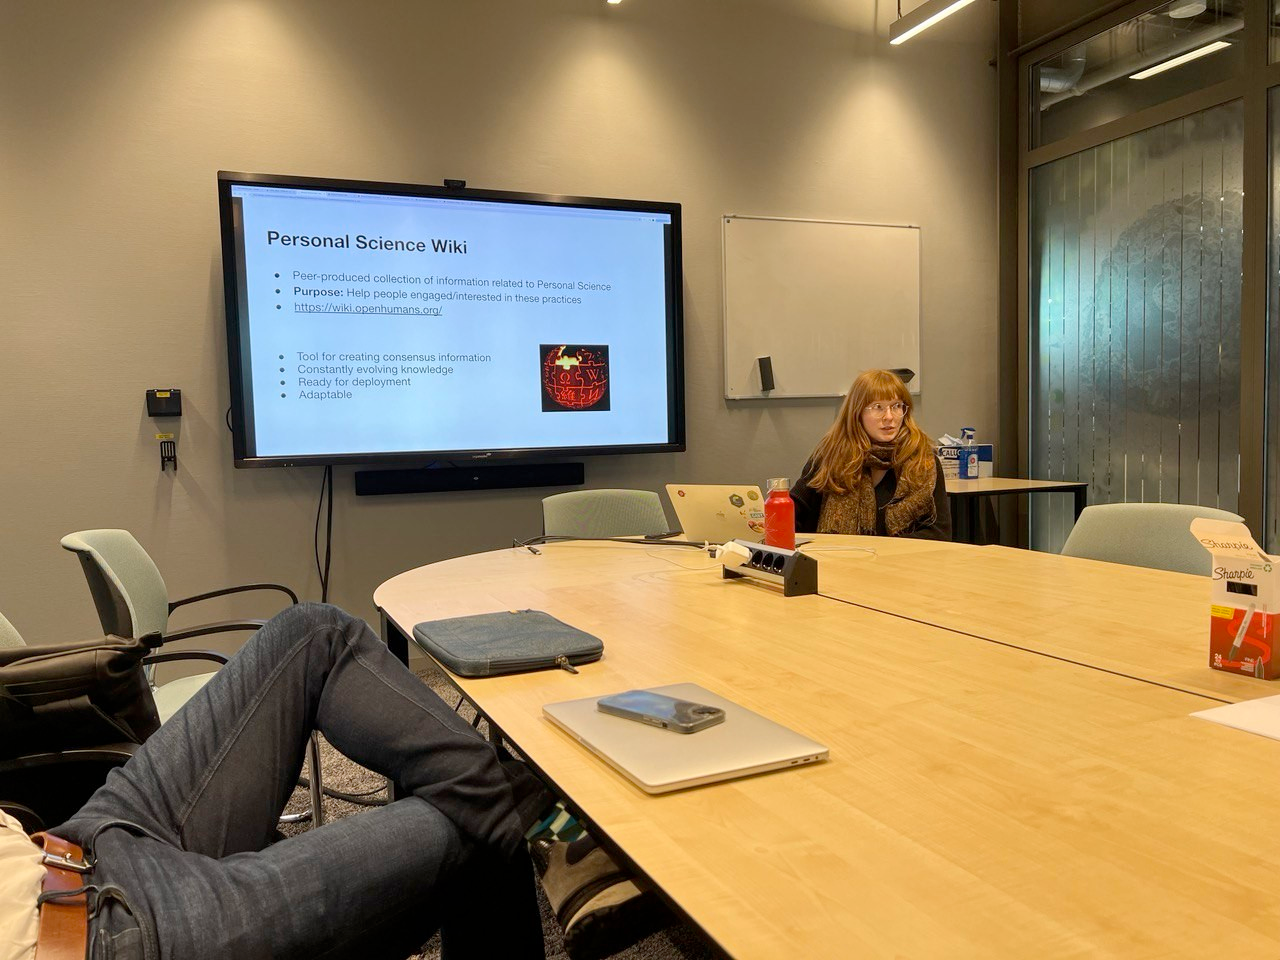 Two people sitting around a conference table, with a screen showing a slide in the background. The slide reads "Personal Science Wiki. in bullet points: 1. Peer-produced collection of information related to personal science 2. Purpose: help people engaged/interested in these practices. 3. Tool for creating consensus information 4. Constantly evolving knowledge 5. Ready for deployment 6. adaptable